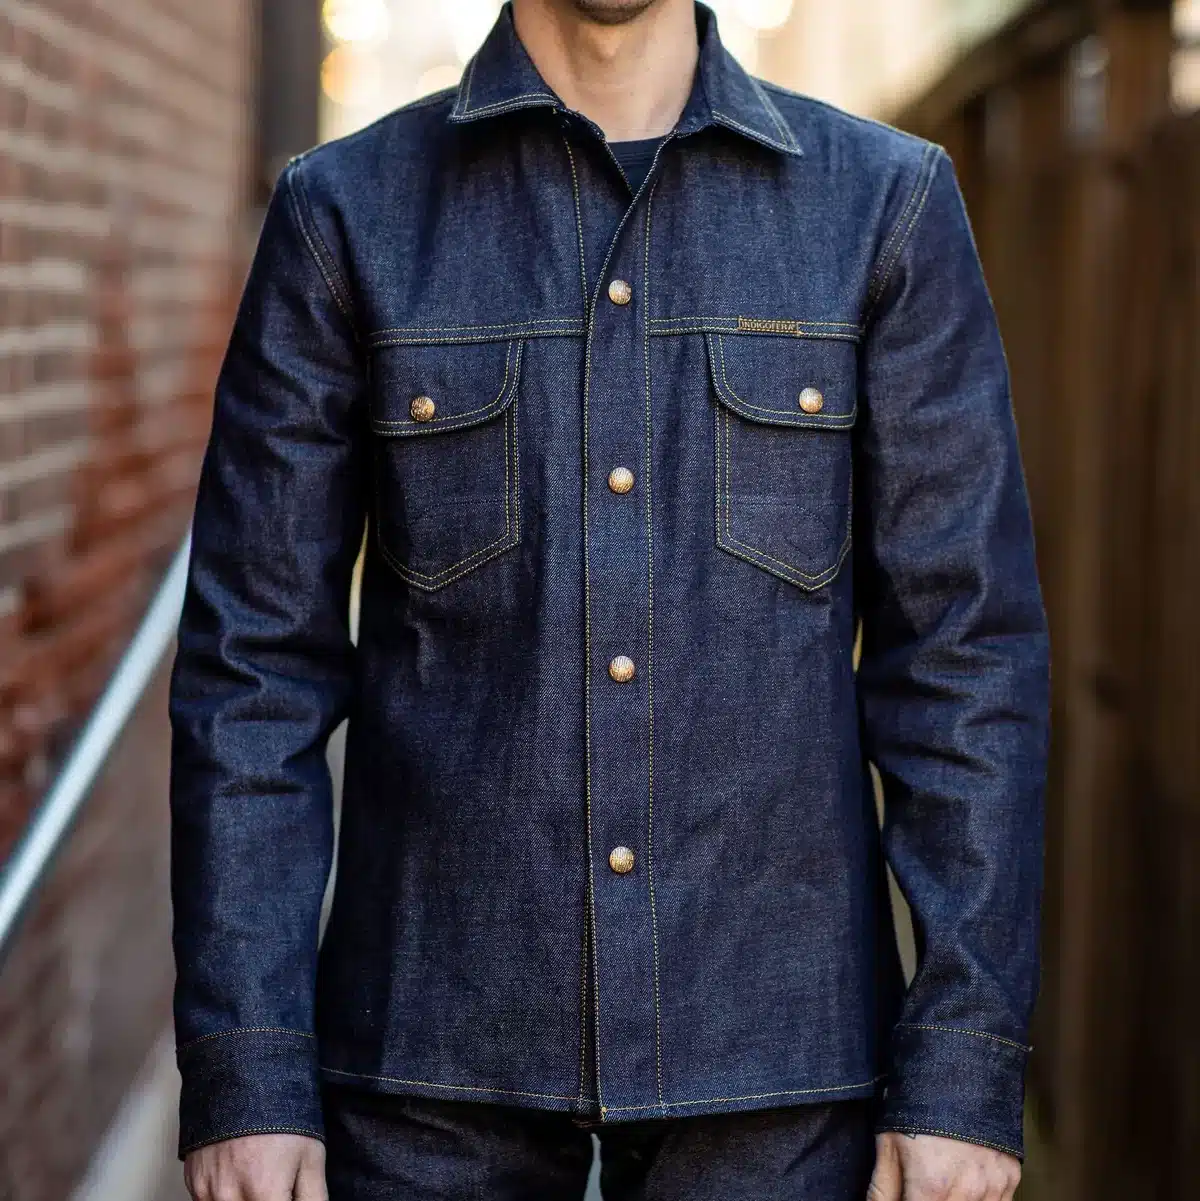 Well Made Essentials Denim Shirt Buying Guide Indigofera 29 Hand Dip Copeland Franklin and Poe Front edited